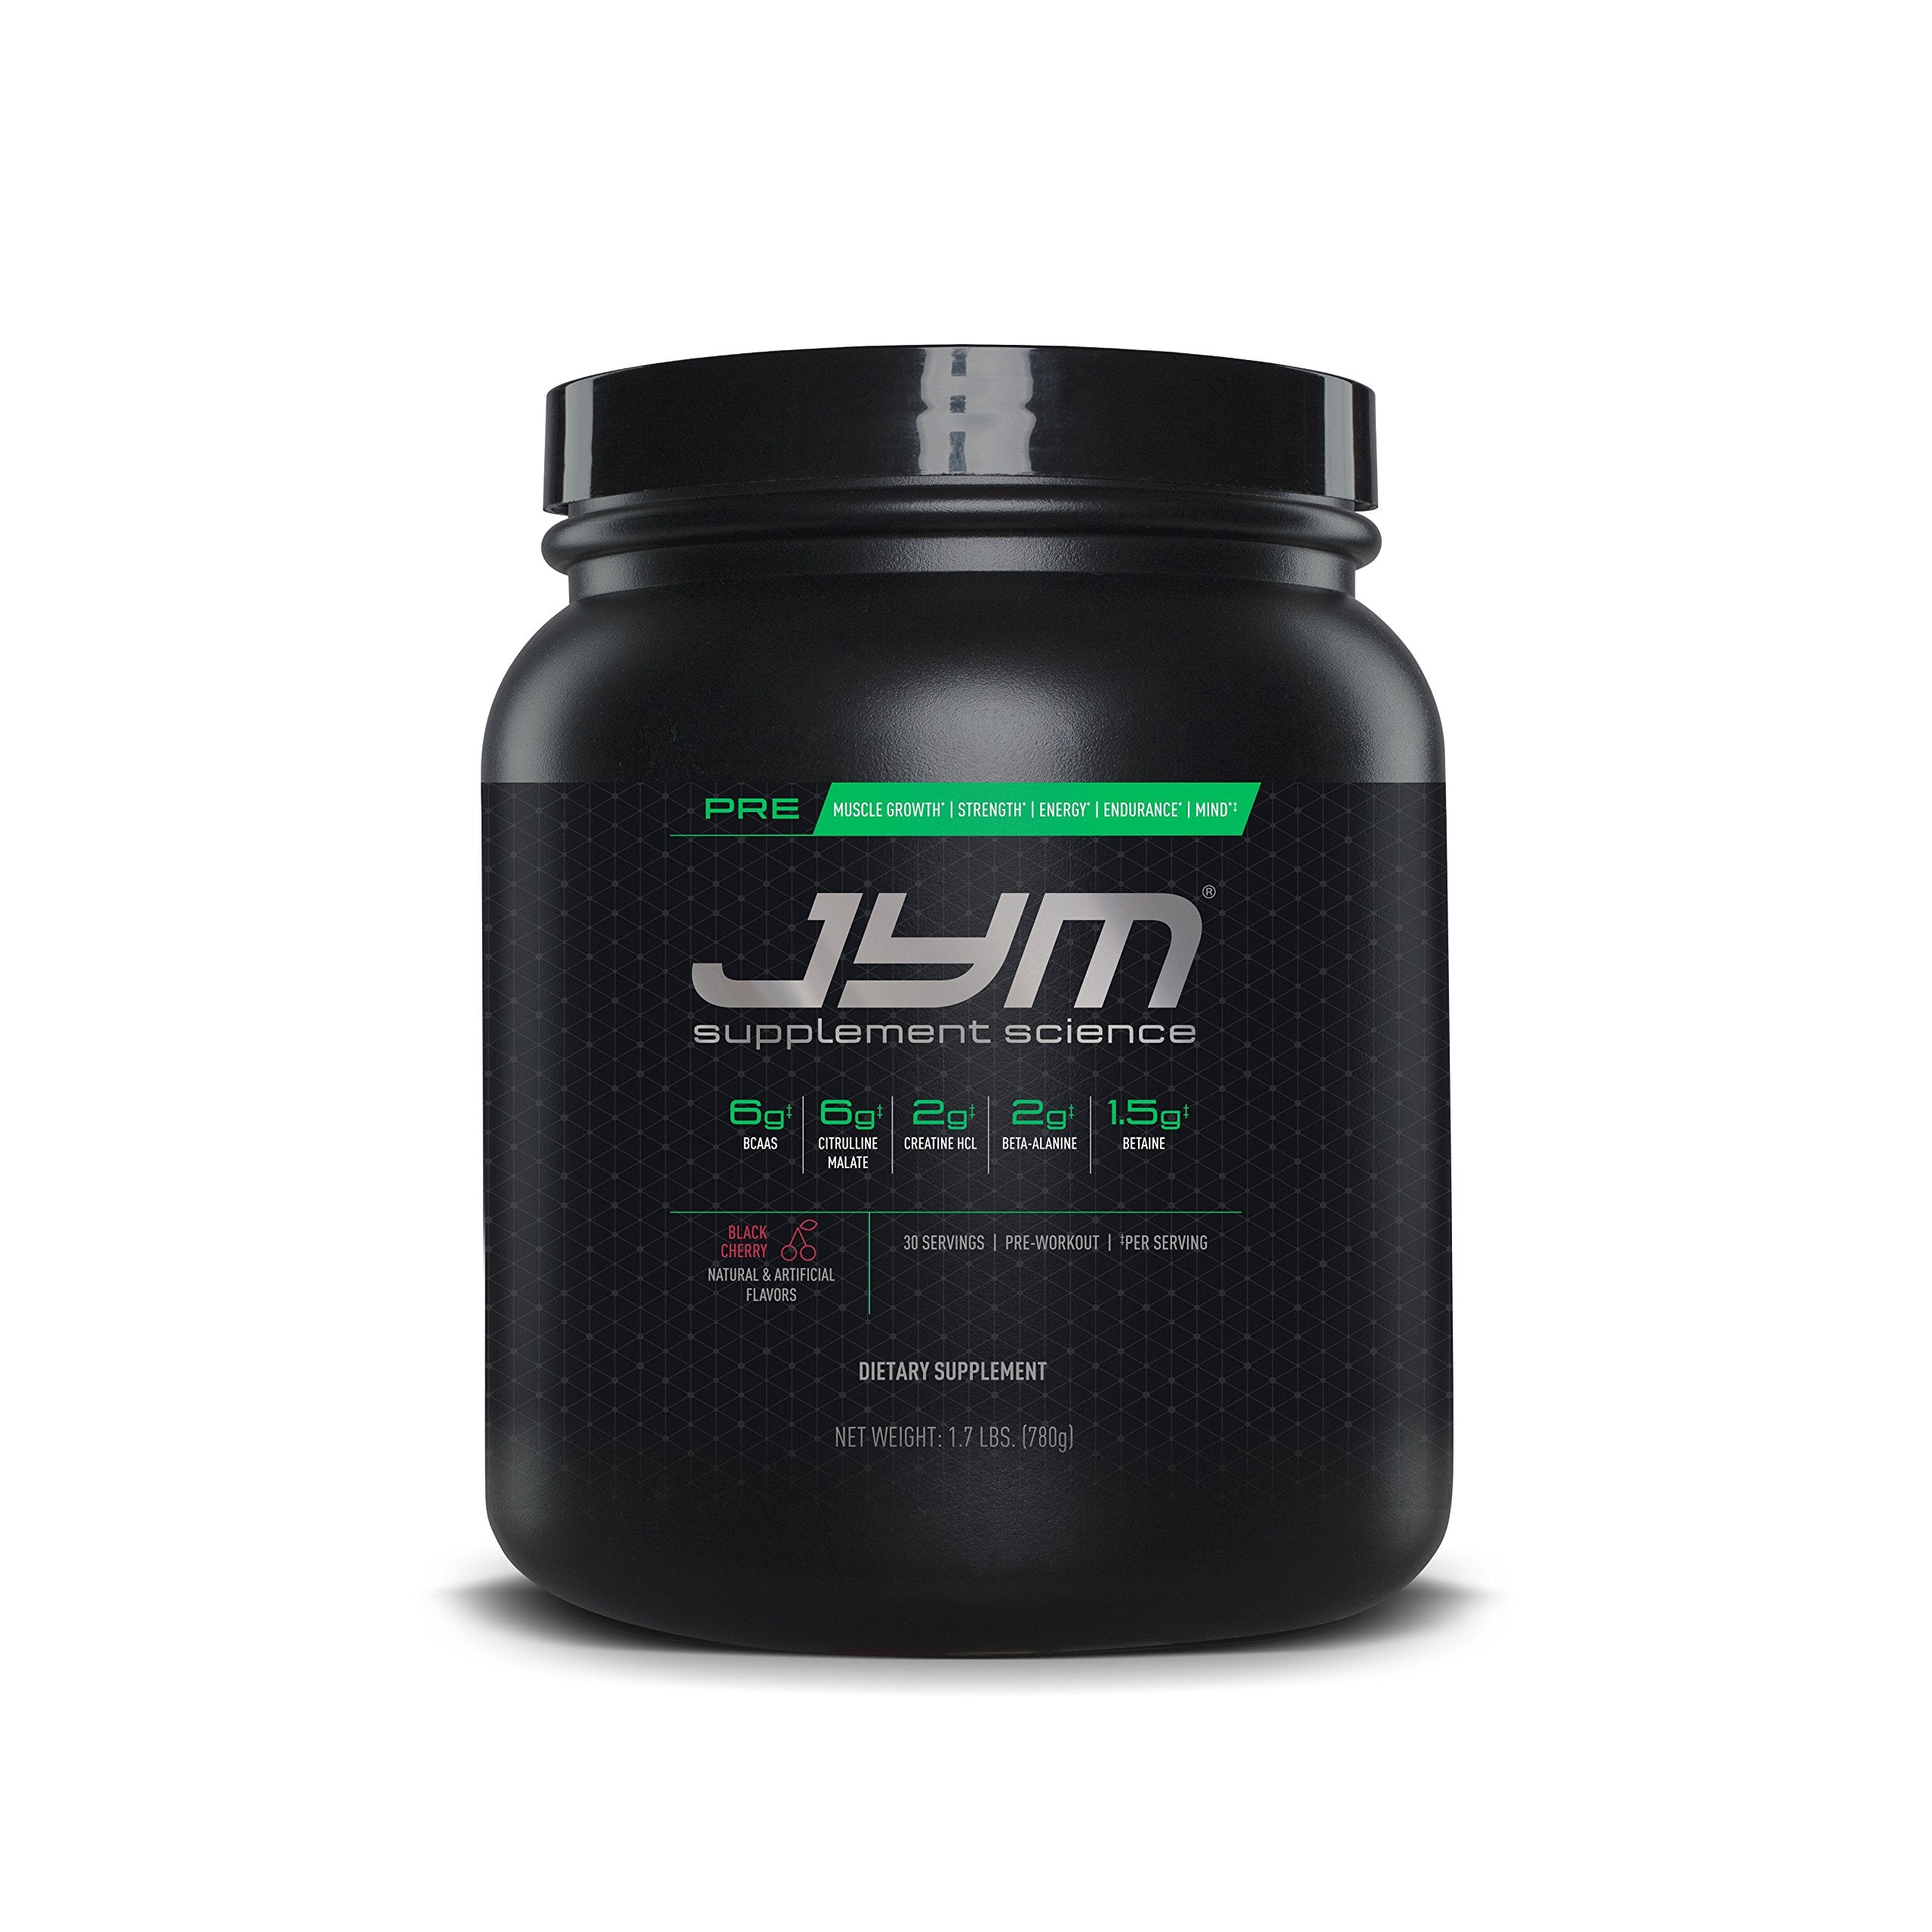 Pre JYM Pre Workout Powder - BCAAs, Creatine HCI, Citrulline Malate, Beta-Alanine, Betaine, and More | JYM Supplement Science | Black Cherry Flavor, 30 Servings